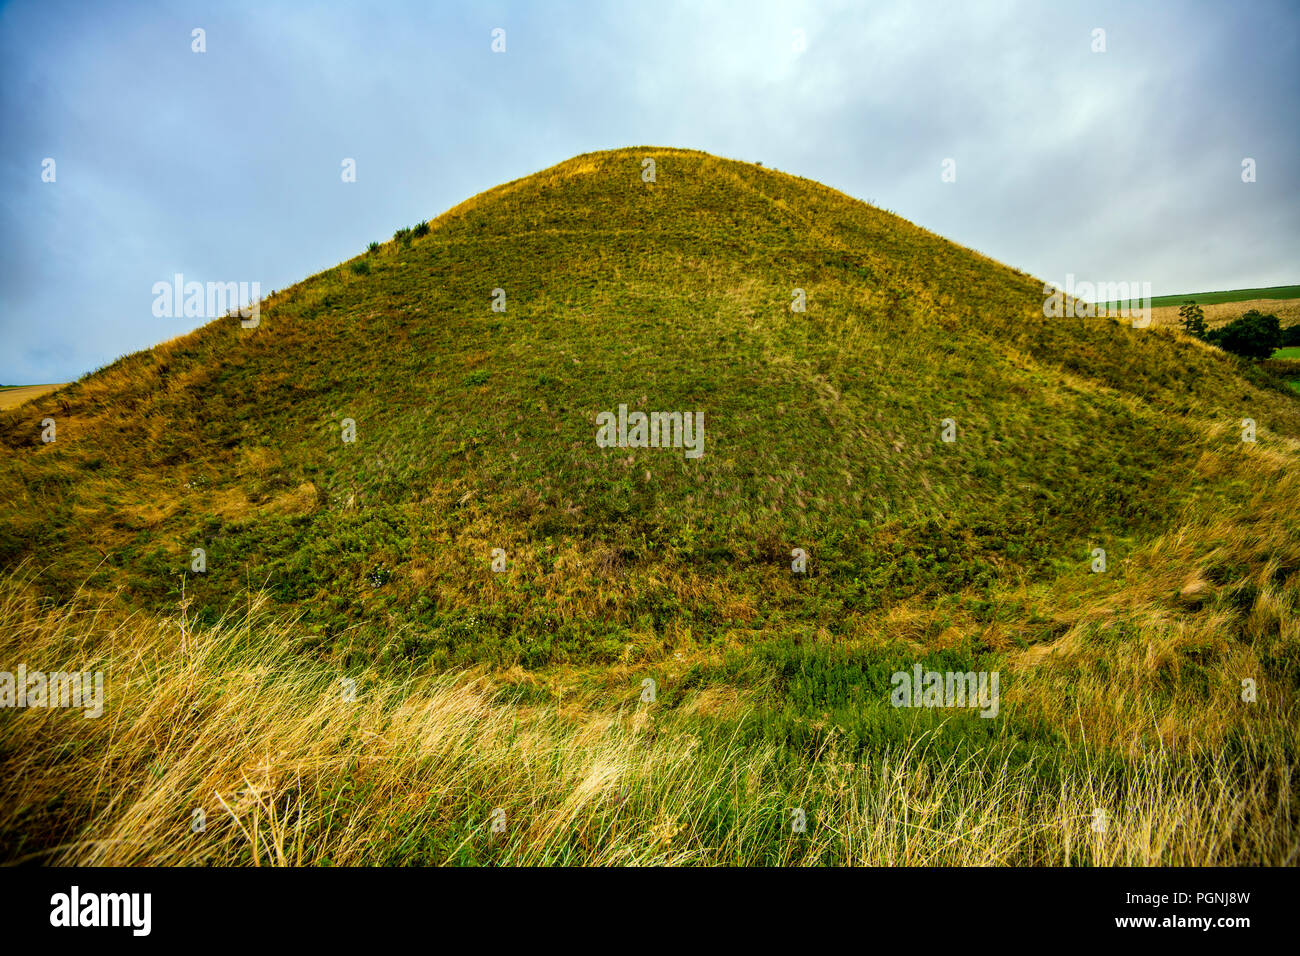 Silbury Hill, the largest man-made Neolithic mound in Europe, covering 5 acres. It was built over a 100-year period around 2,400 BCE by Beaker culture Stock Photo